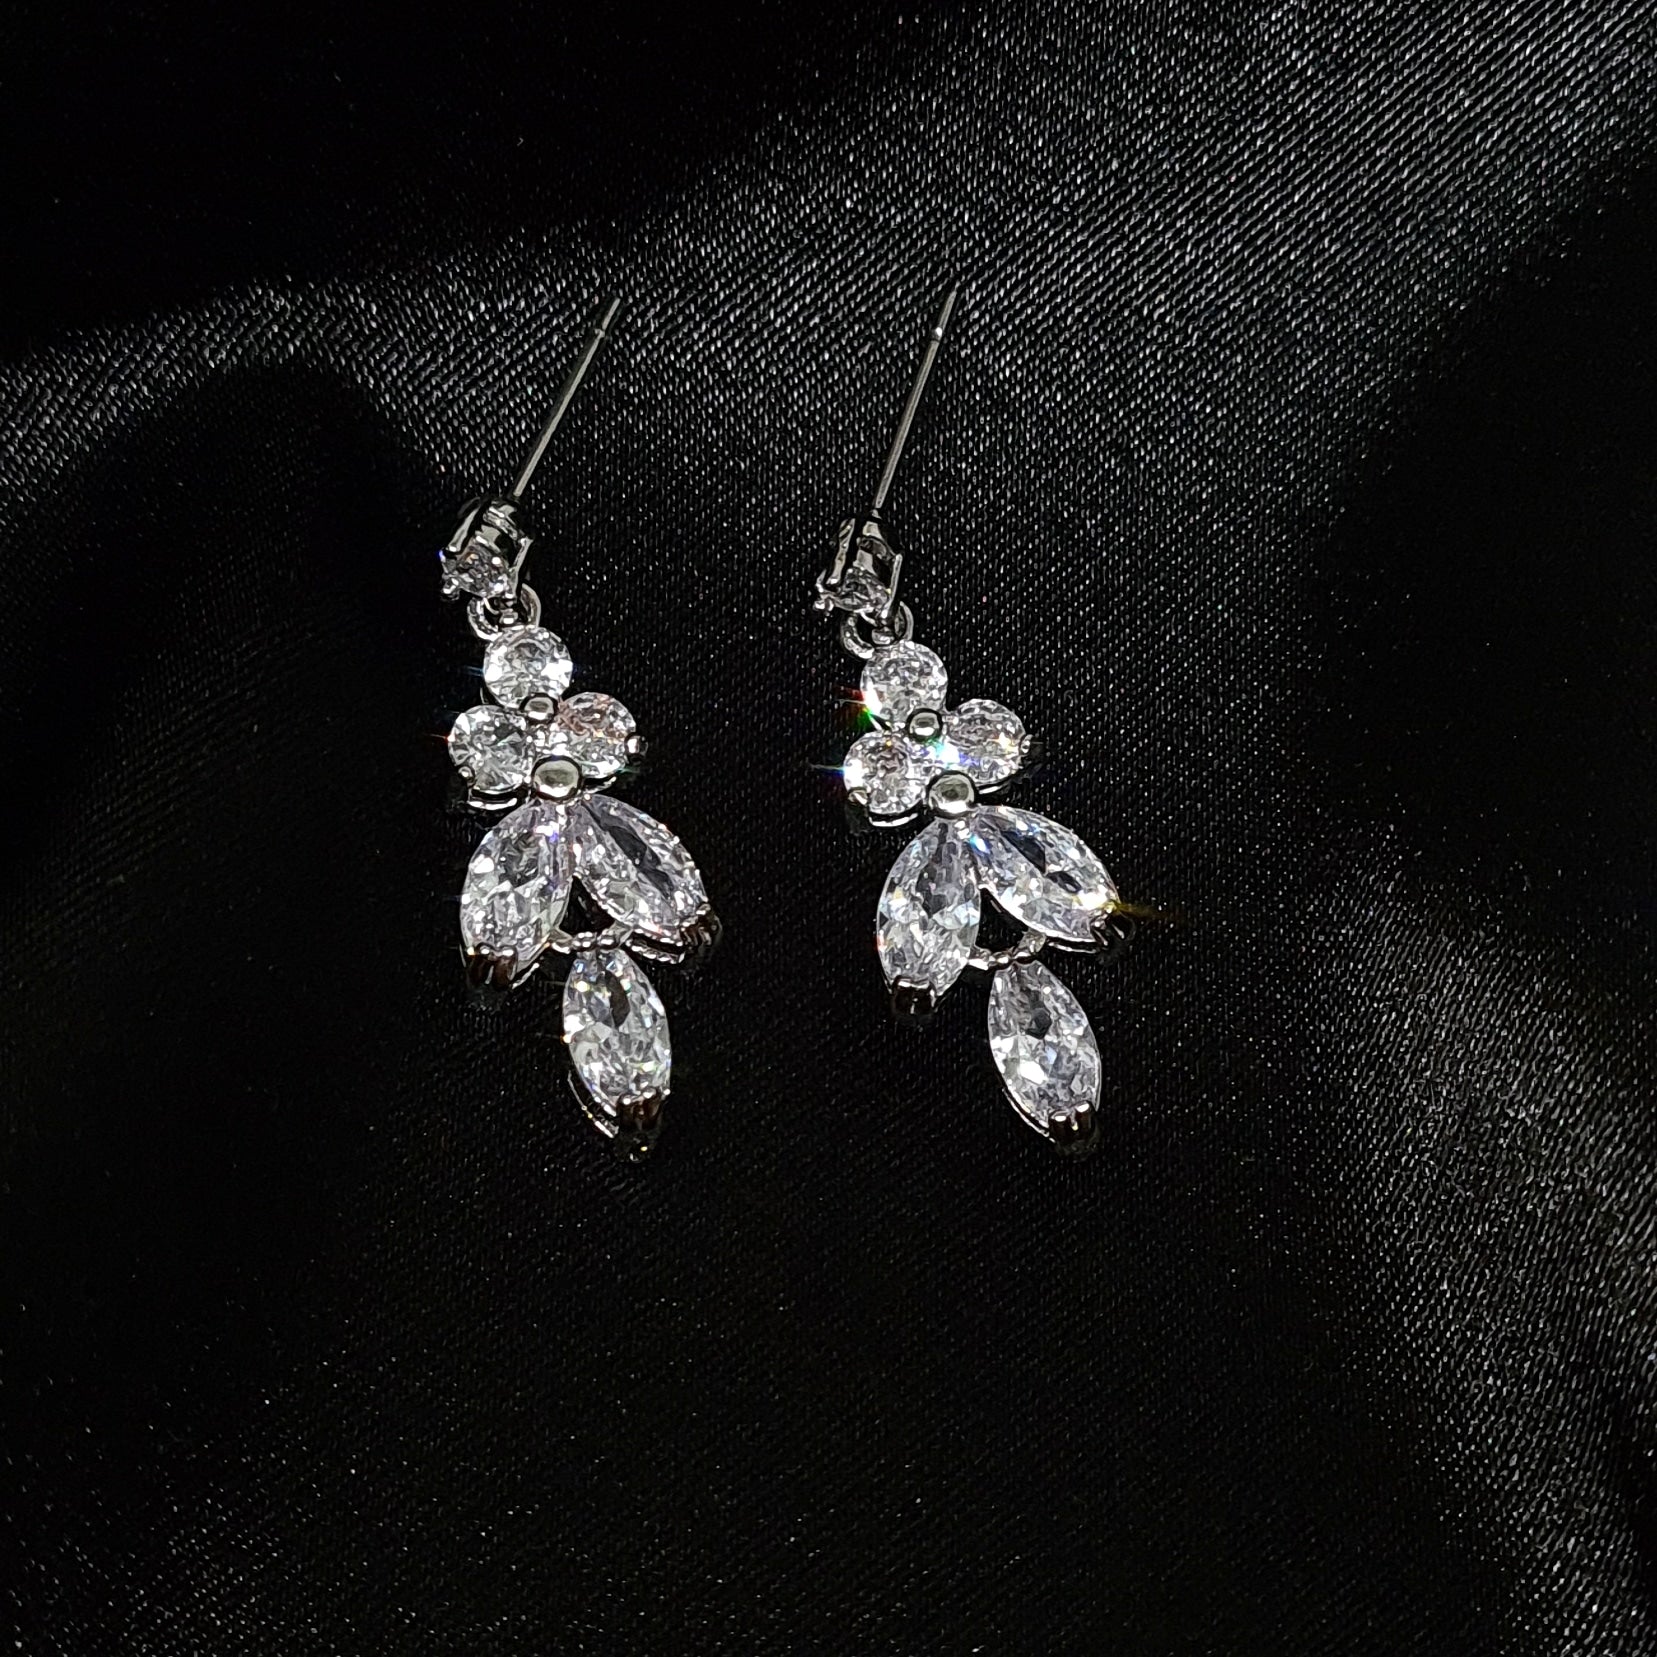 A close-up of a pair of silver earrings with cubic zirconia. The earrings are simple in design, with a modern twist. The cubic zirconia are sparkling and the earrings are a perfect accessory for a special occasion or a gift for a loved one.